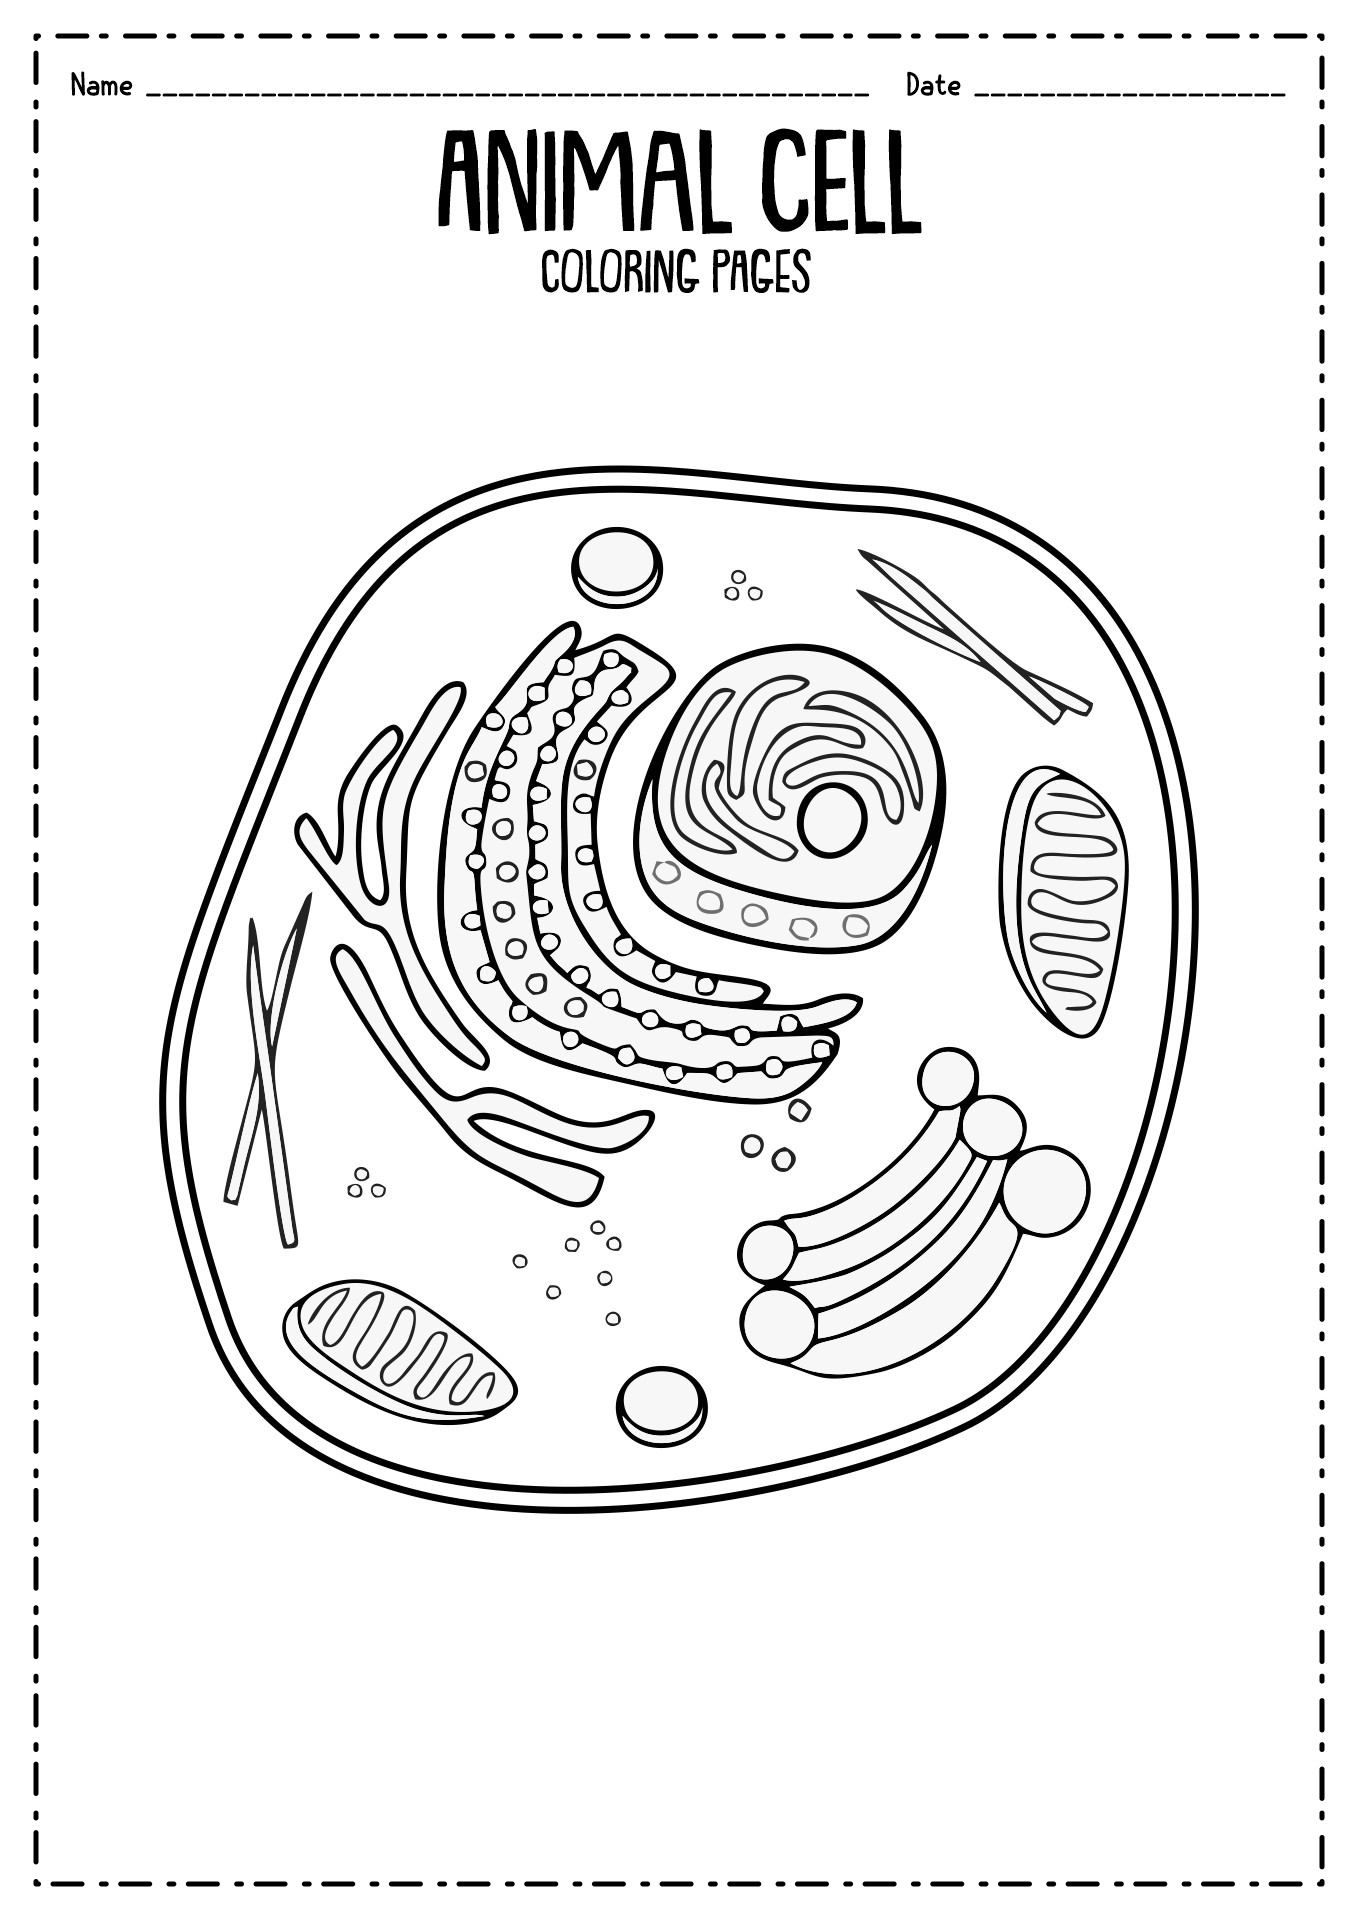 Animal Cell Coloring Diagram Coloring Pages